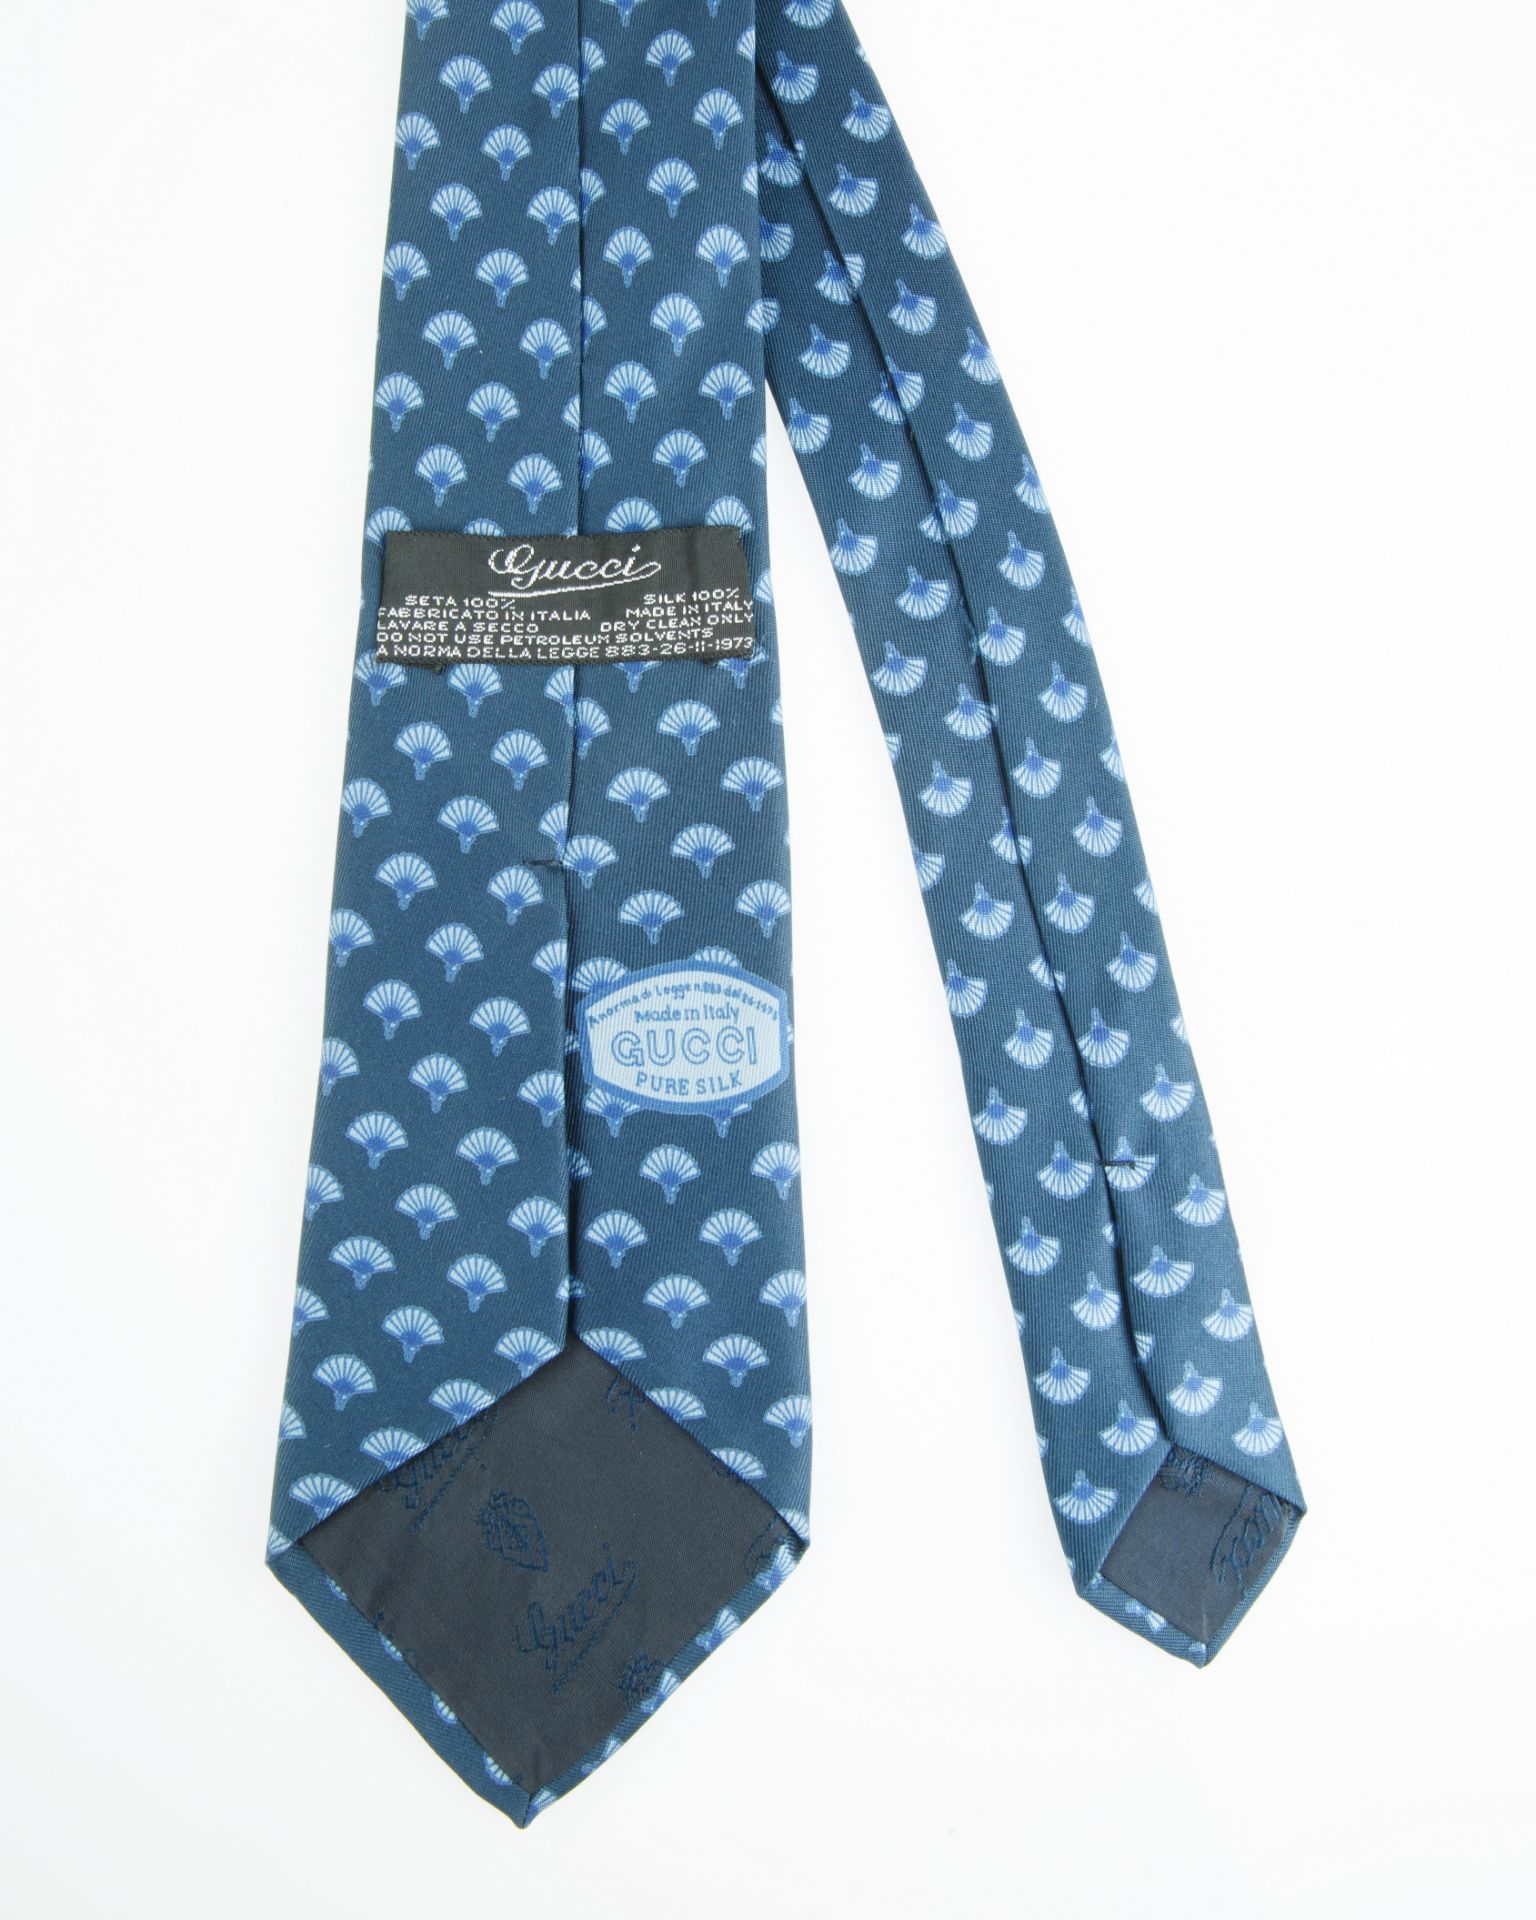 GROUP OF SEVEN GUCCI TIES - Image 7 of 15